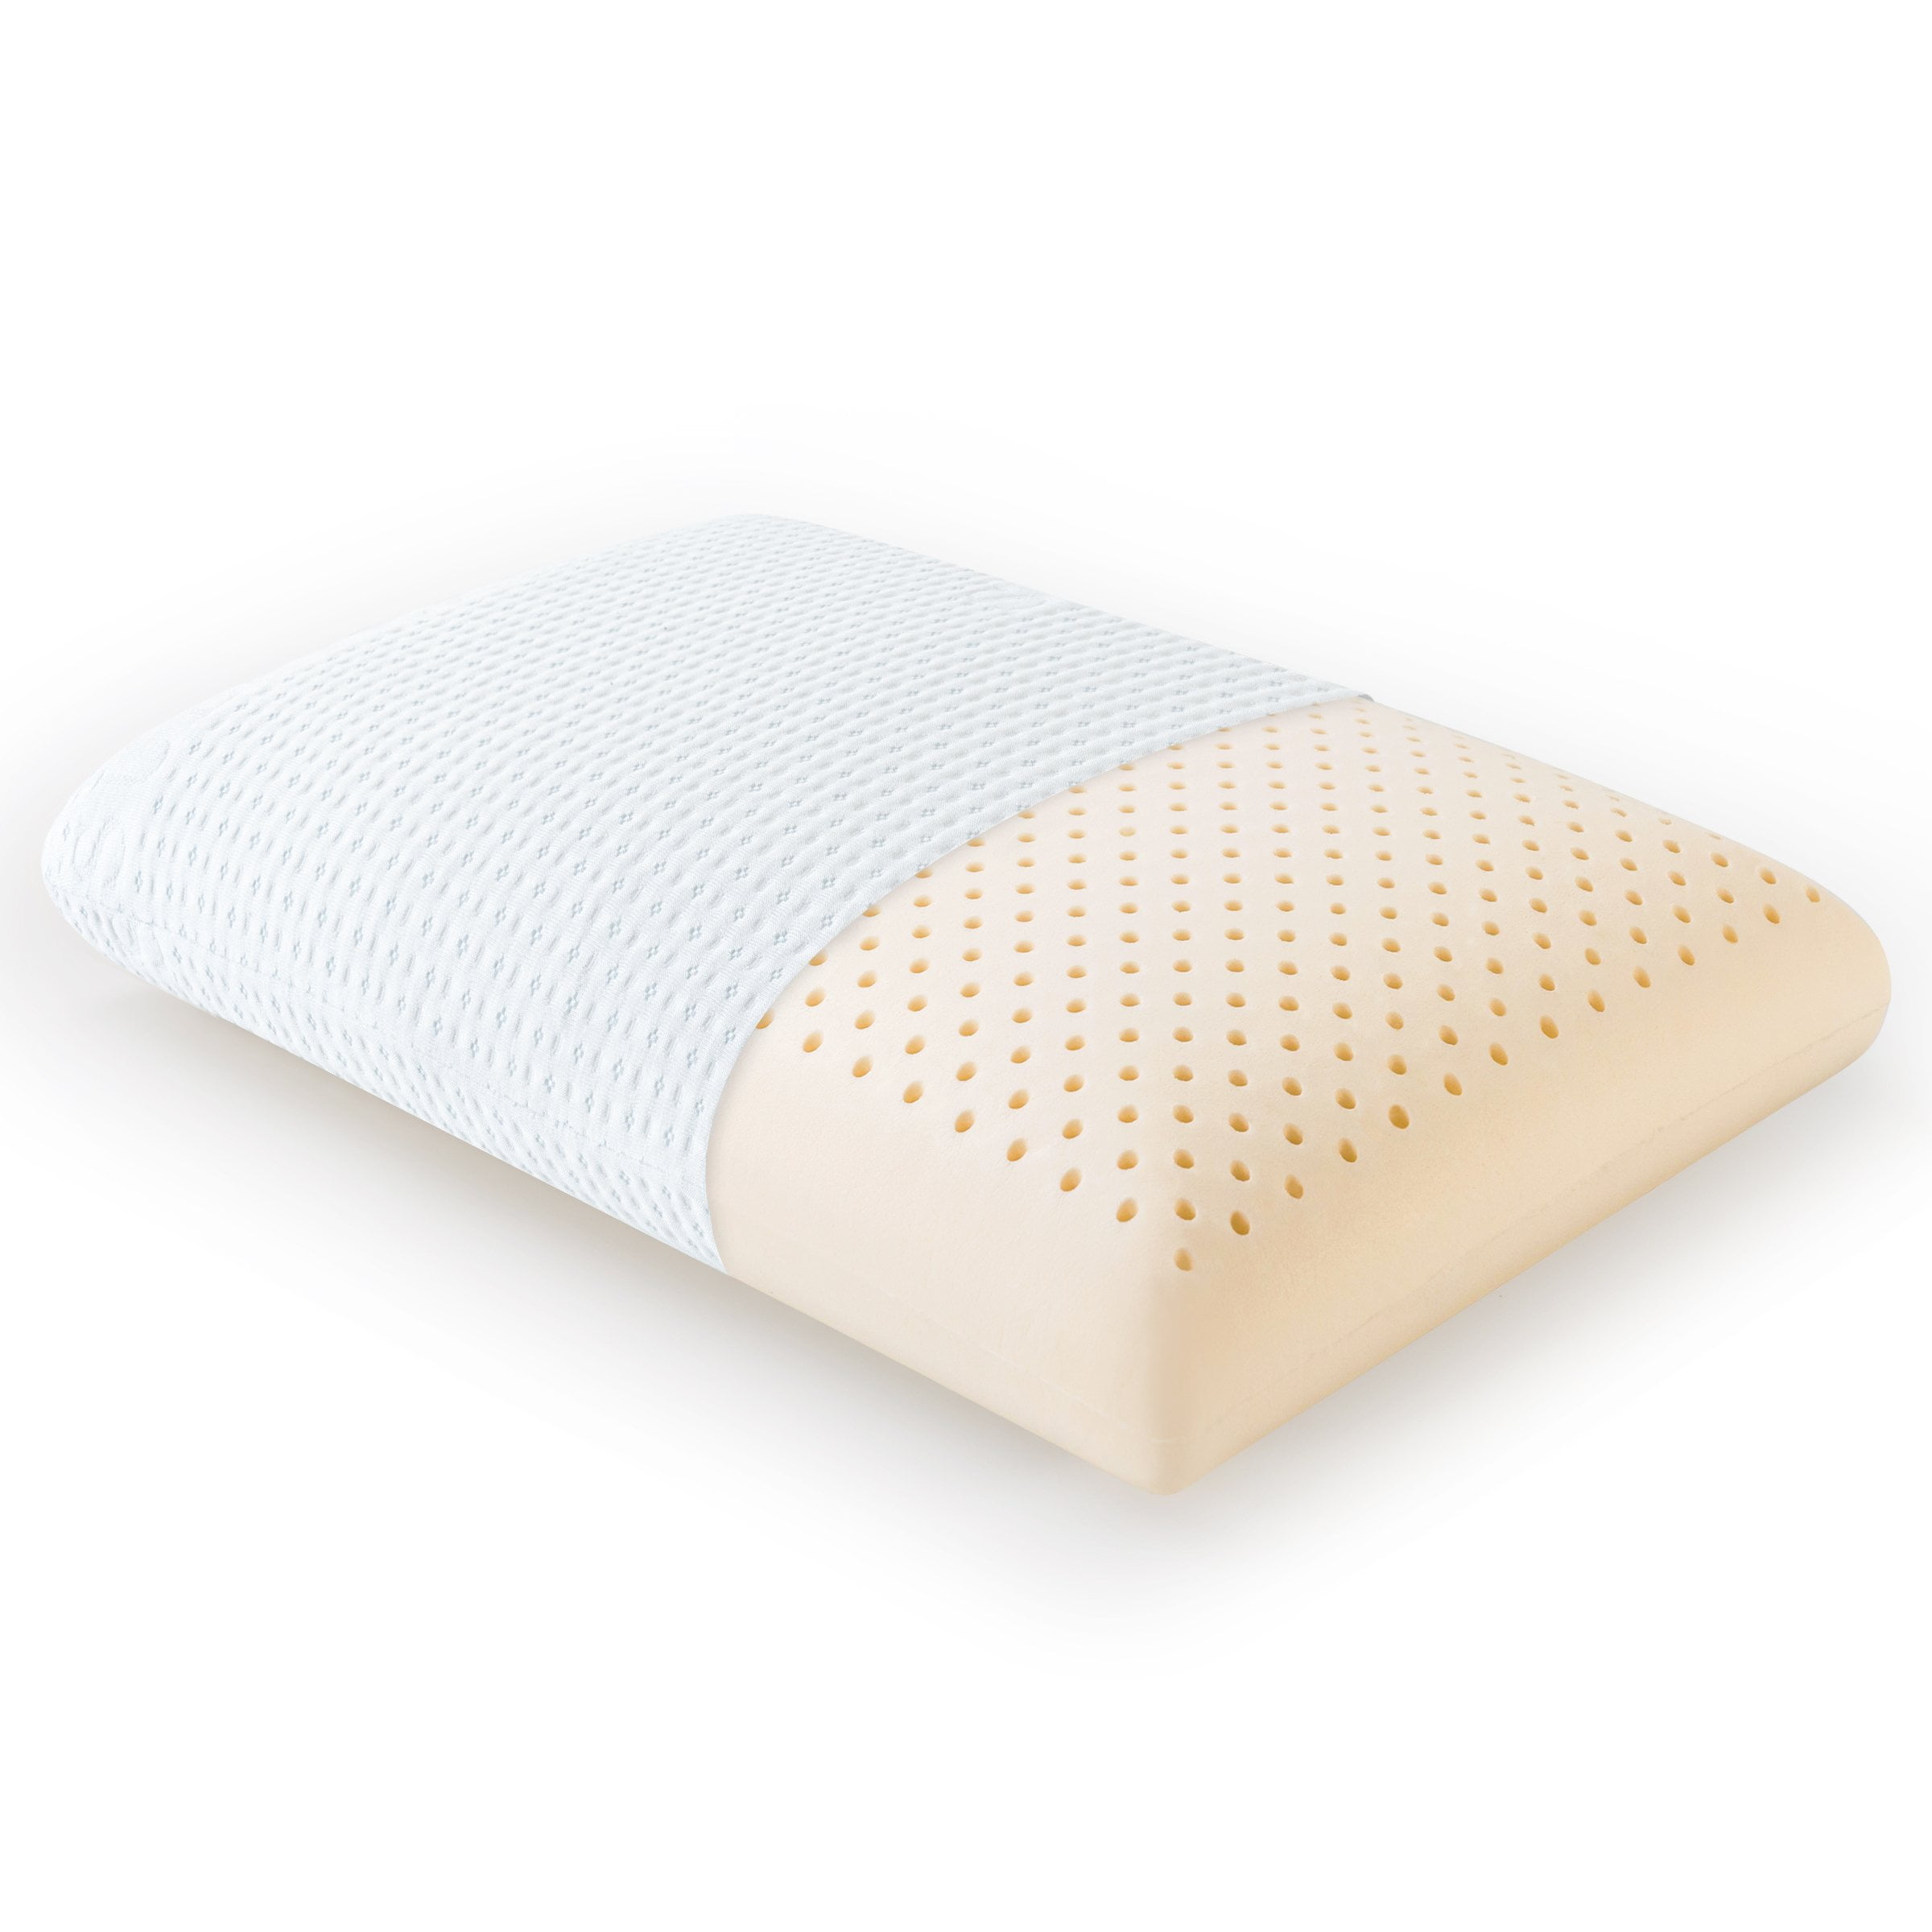 Standard Size Breathable Comfortable With Pillow Cover NATURAL LATEX PILLOW 